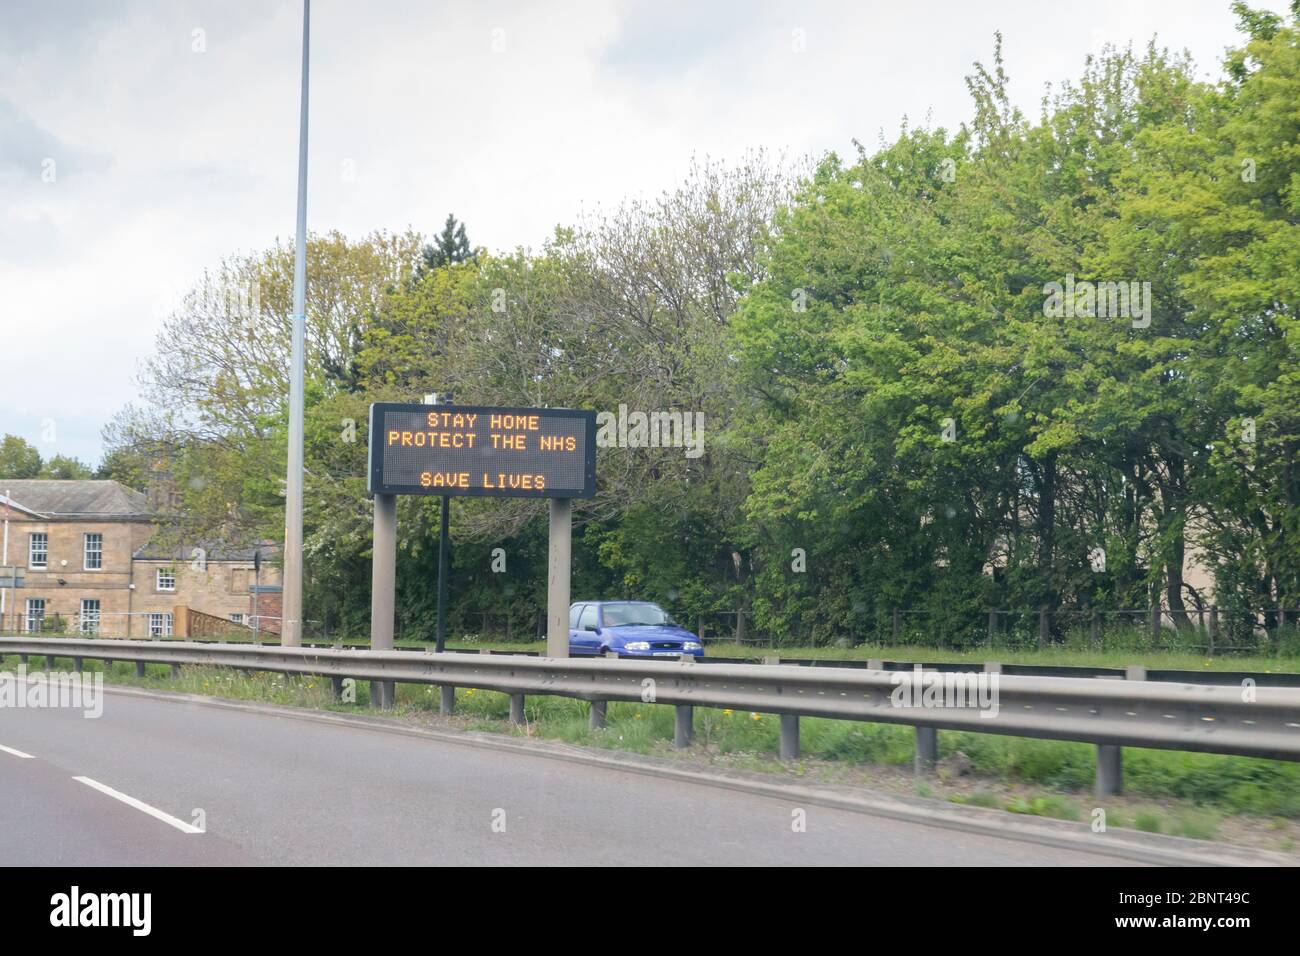 Newcastle/UK - 4th May 2020: Lockdown life in the Northeast. Motorway sign displays Stay Home Protect the NHS Save lives sign Stock Photo